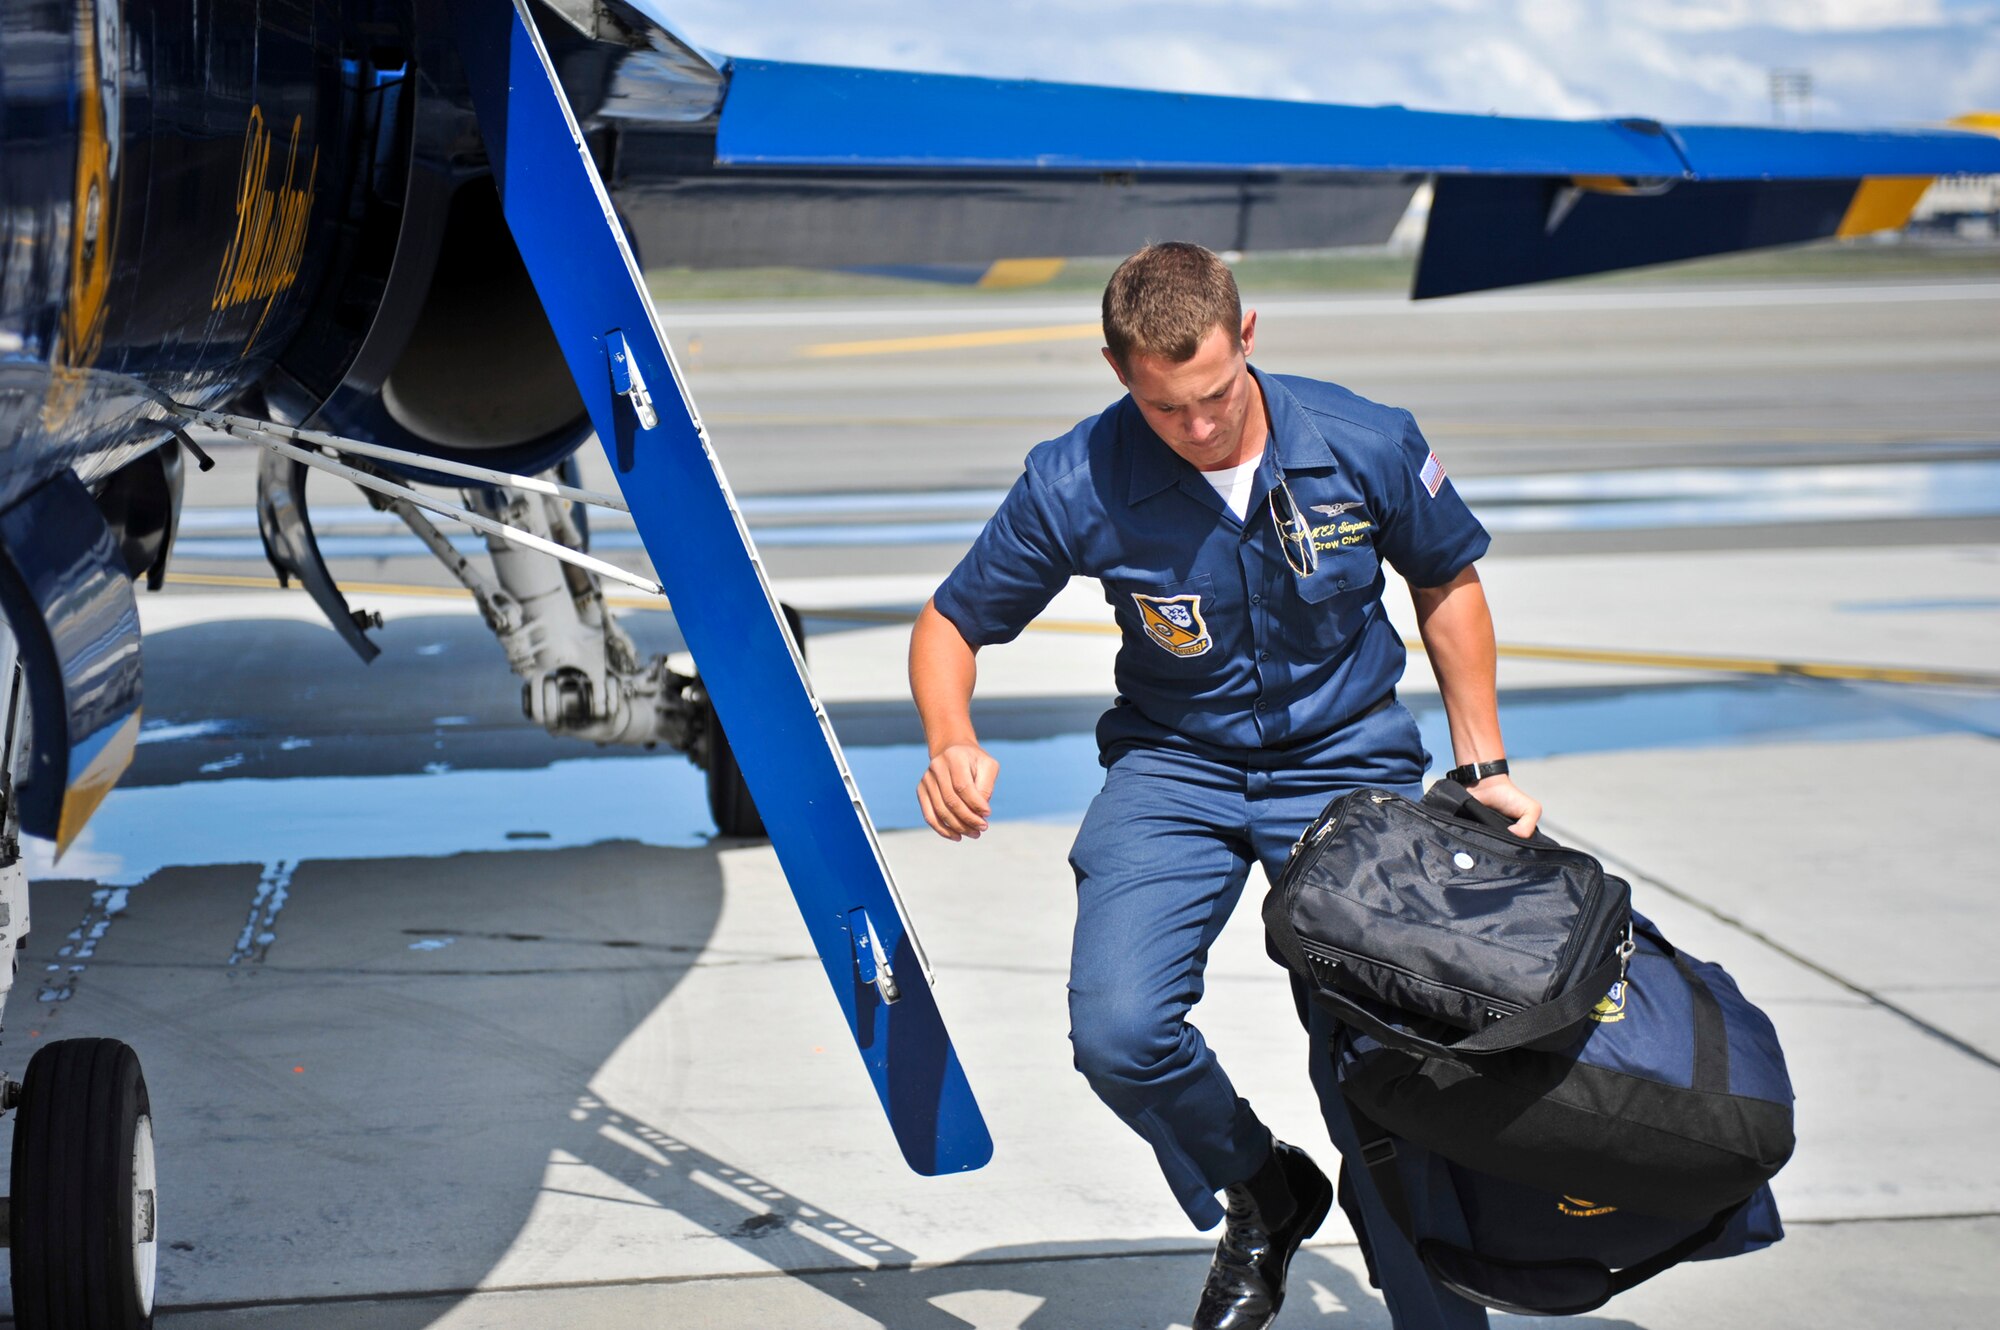 JOINT BASE ELMENDORF-RICHARDSON, Alaska – A Blue Angels’ crew chief takes luggage from one of the Blue Angels aircraft after landing at Joint Base Elmendorf-Richardson July 27. The Blue Angels will be one of the main performances during this year’s Arctic Thunder Air Show, taking place July 31 and Aug. 1. Gates open at 9 a.m. and parking and admission are free. (Air Force photo by Airman 1st Class Christopher Gross)